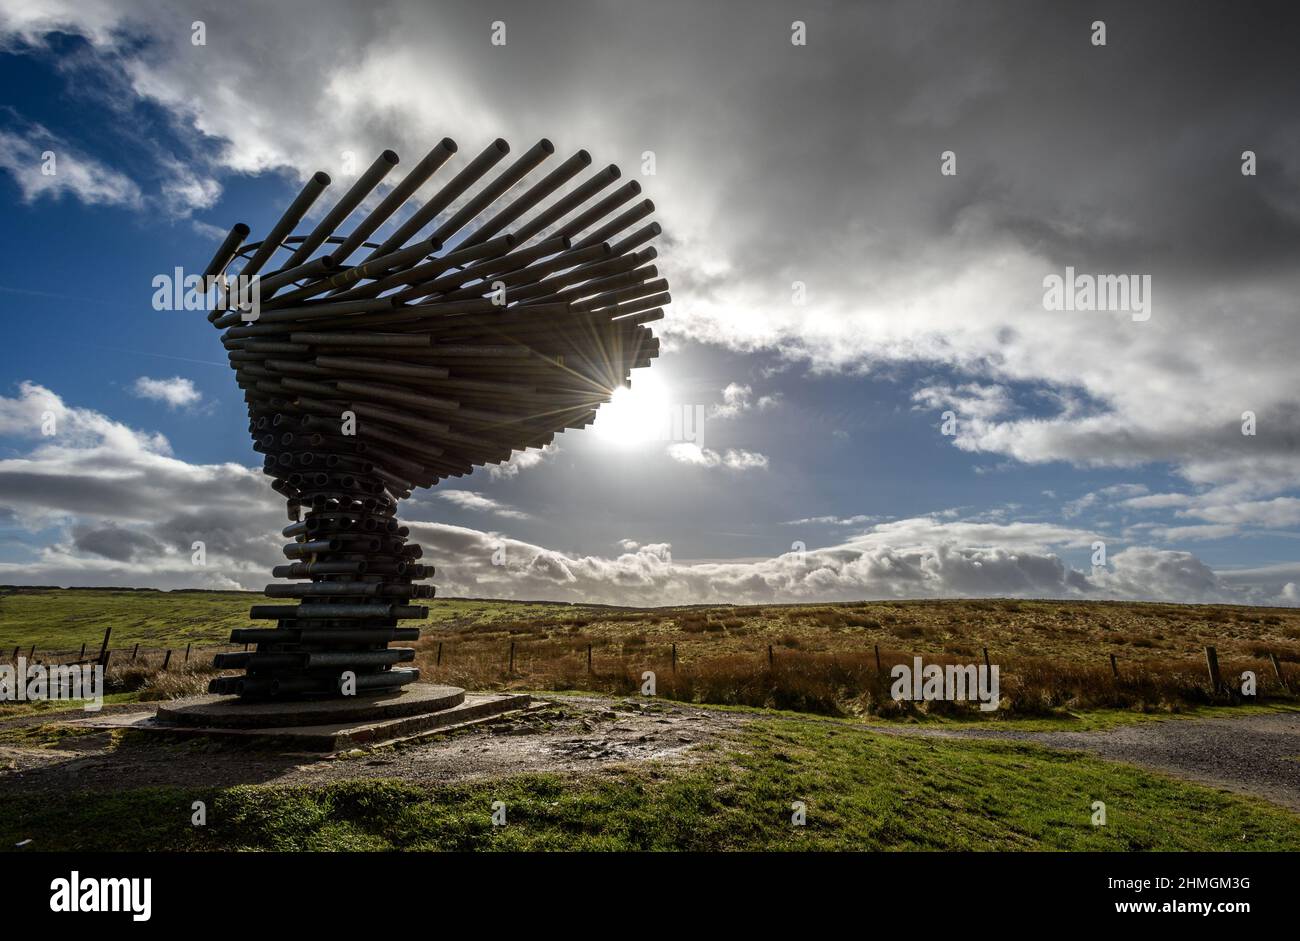 Burnley, Lancashire, UK, Wednesday February 09, 2022. Walkers take a hike along to the Singing Ringing Tree panpoticon over looking the town of Burnle Stock Photo